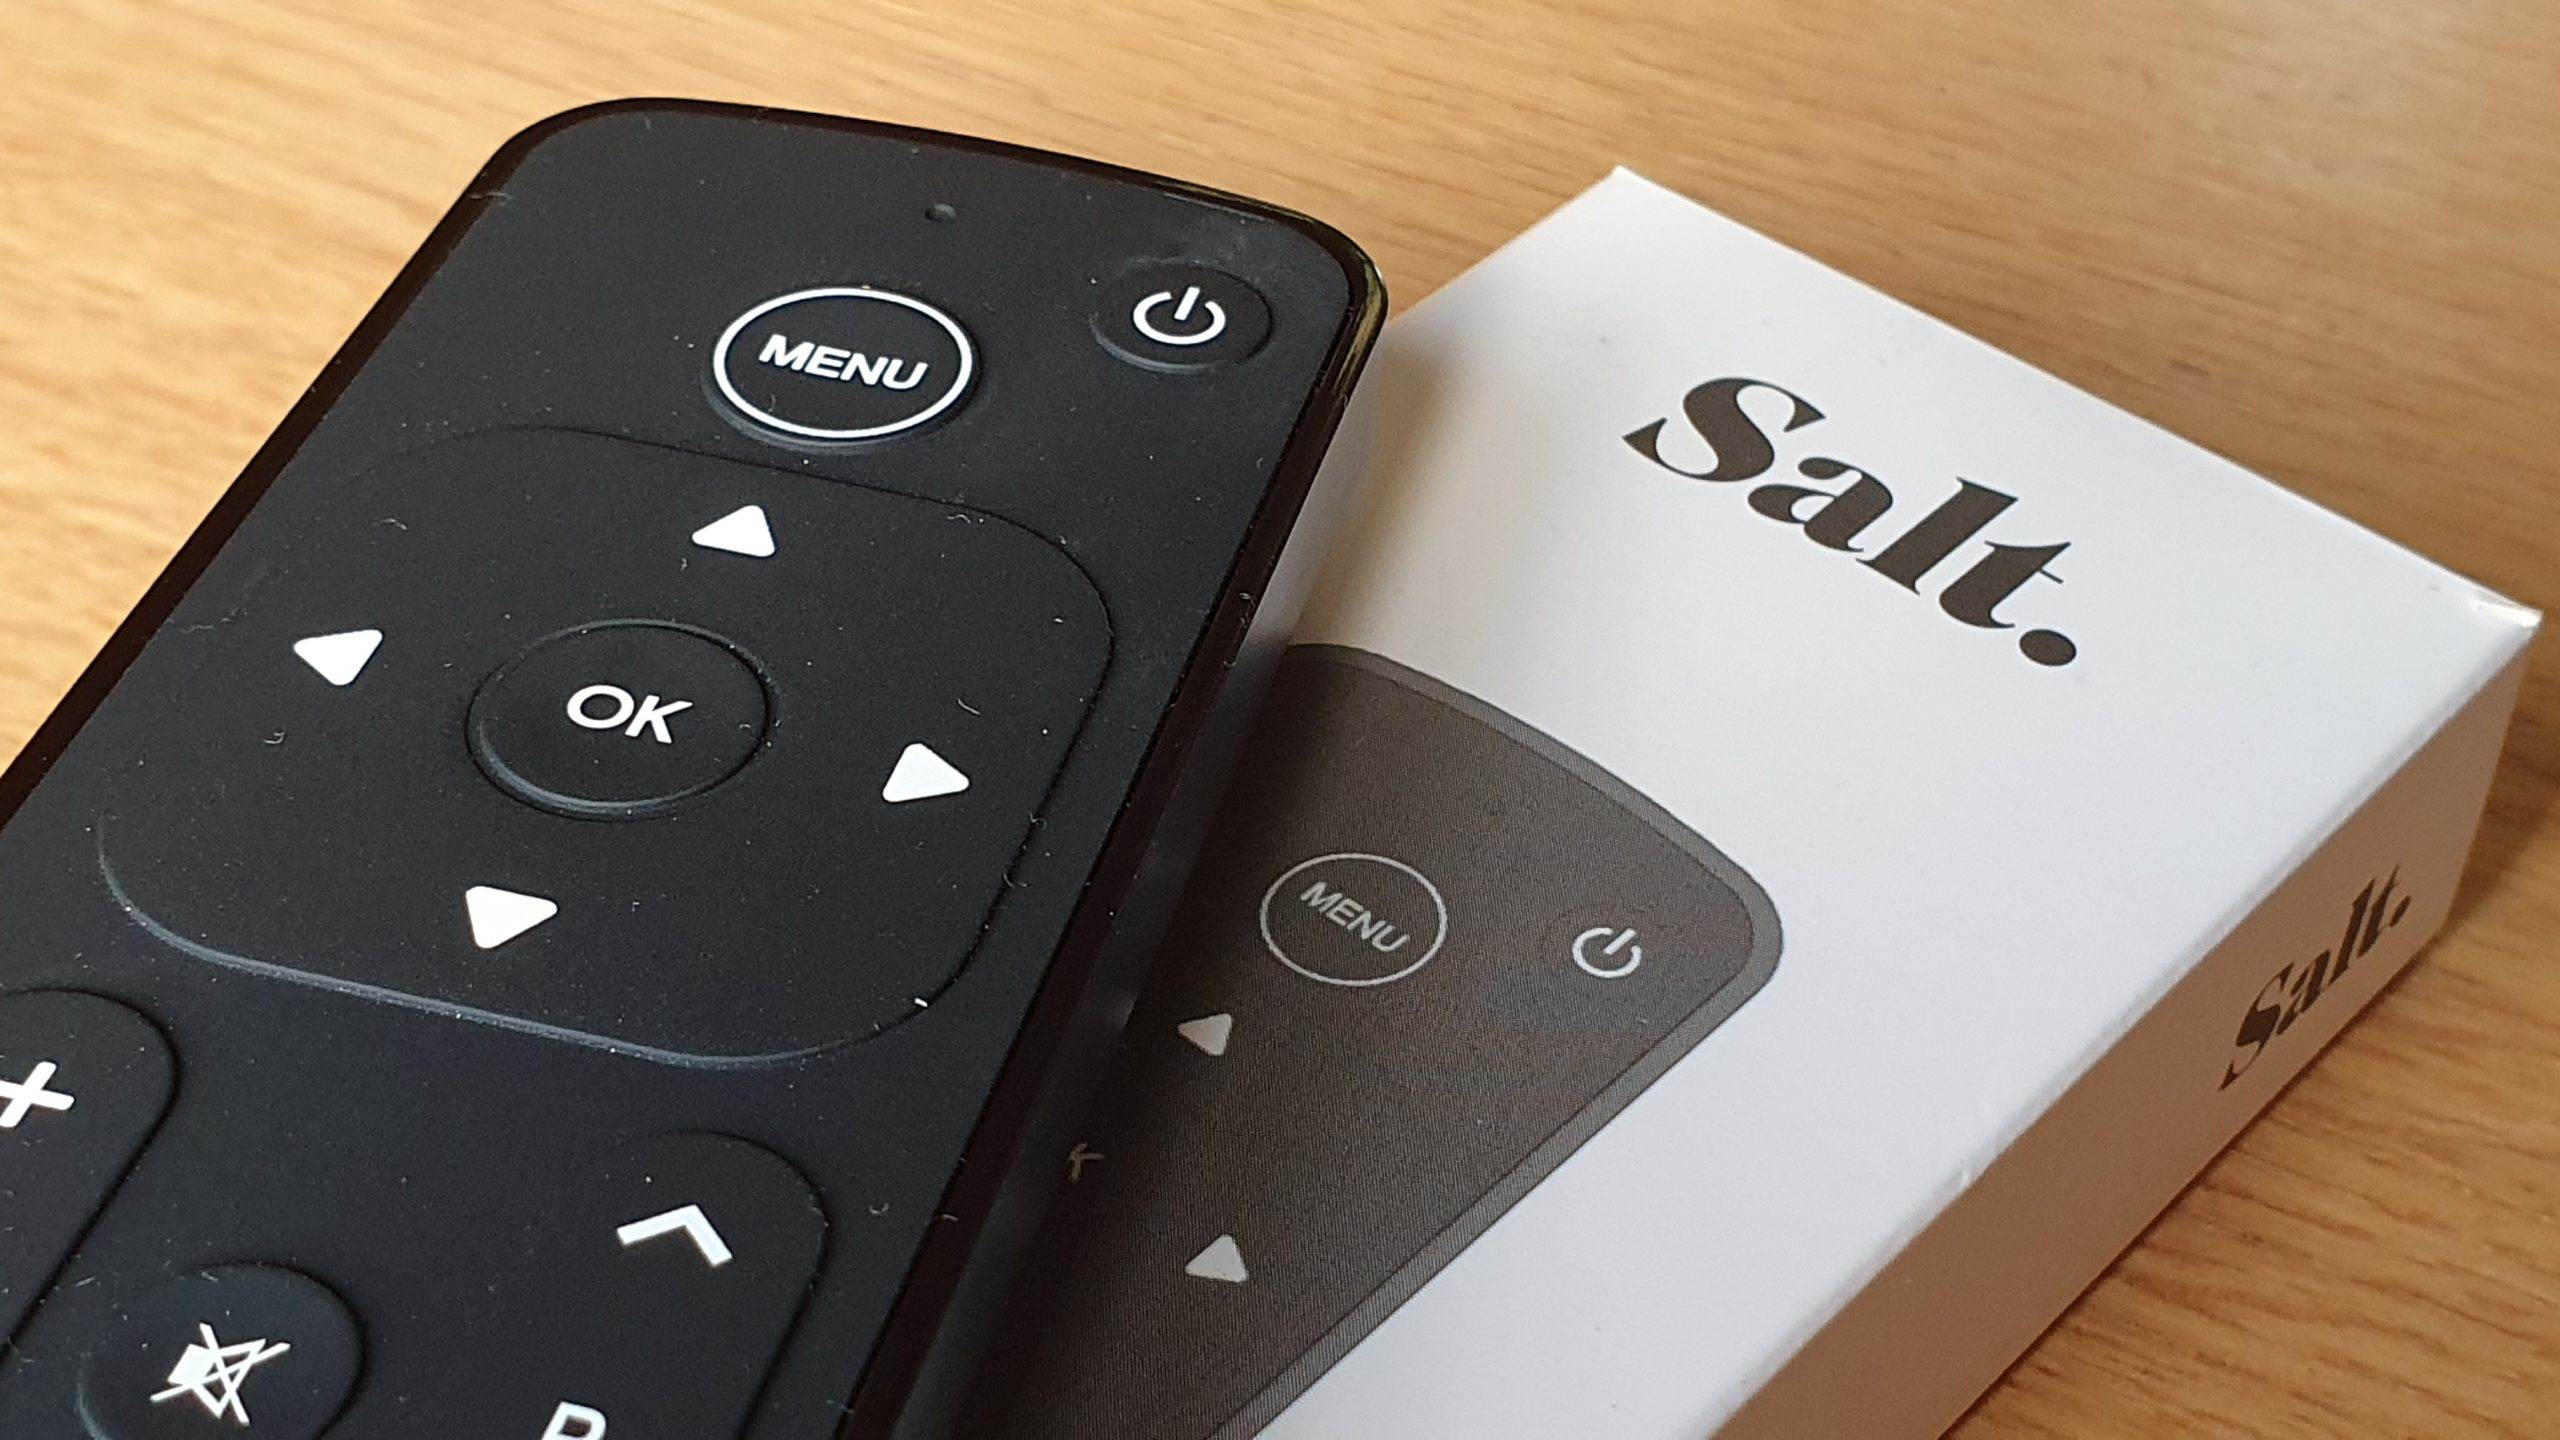 A Swiss broadband provider offers remote control for your Apple TV